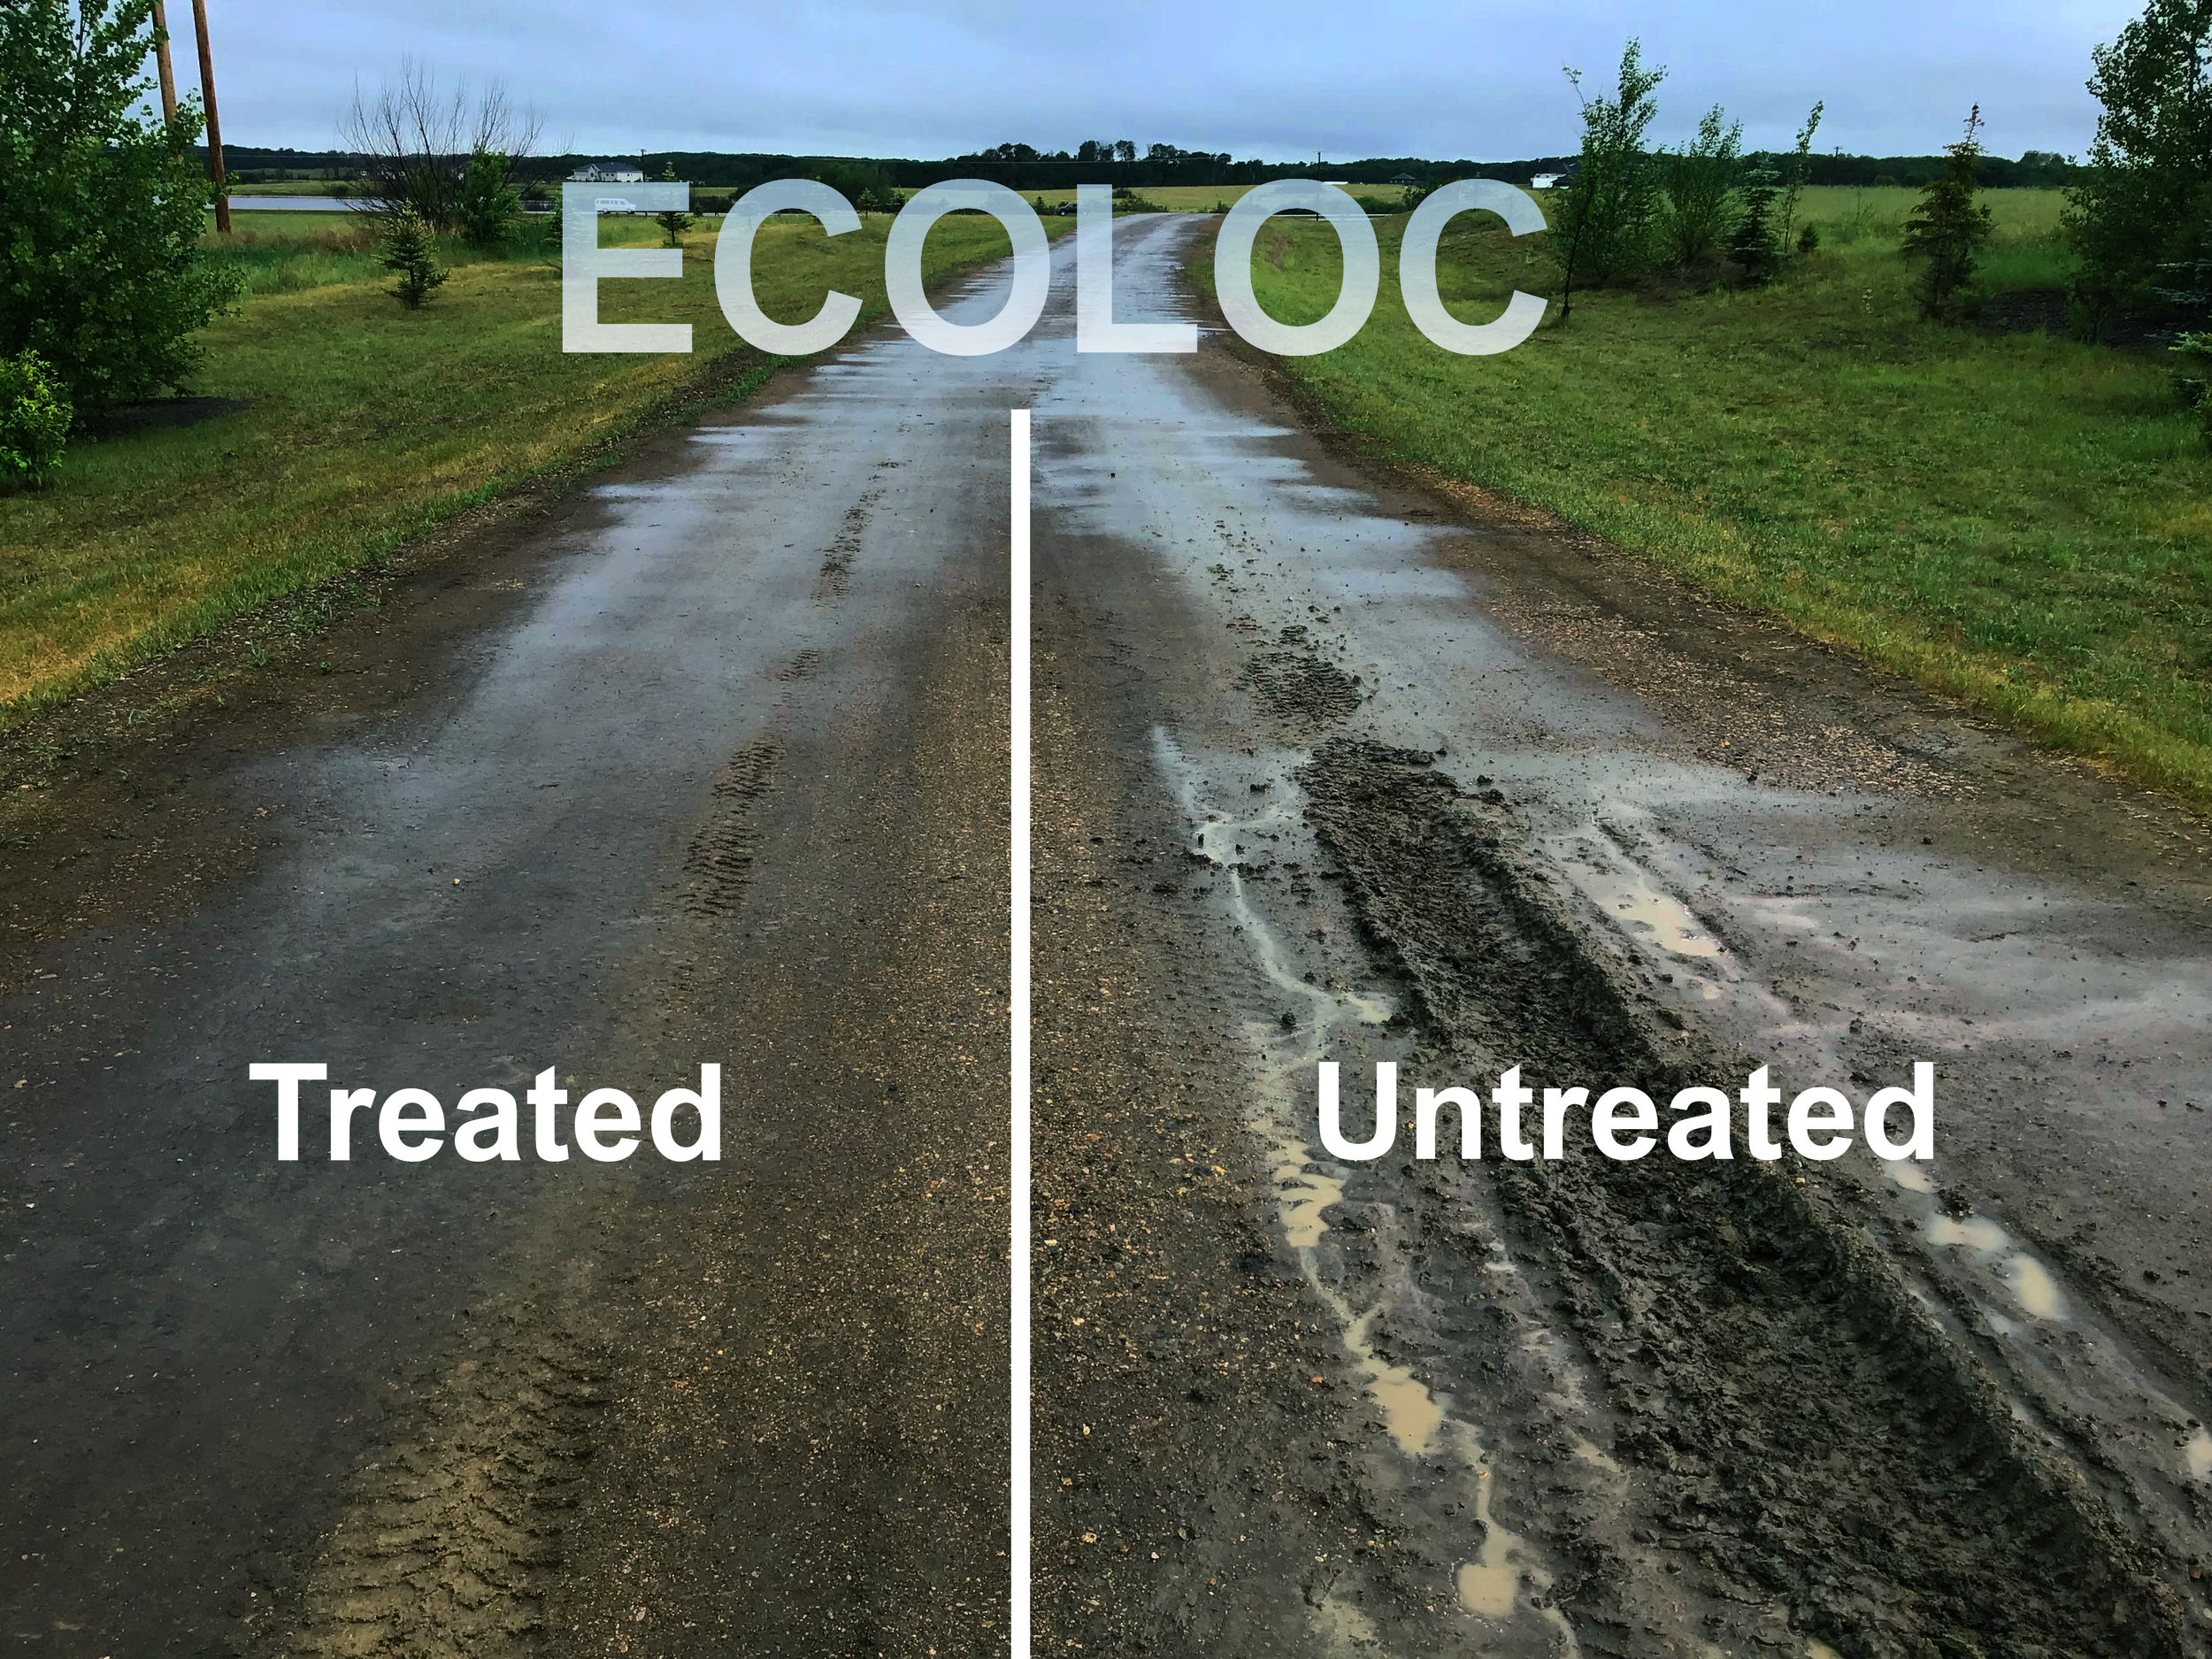 ecoloc driveway with and without treatment.png